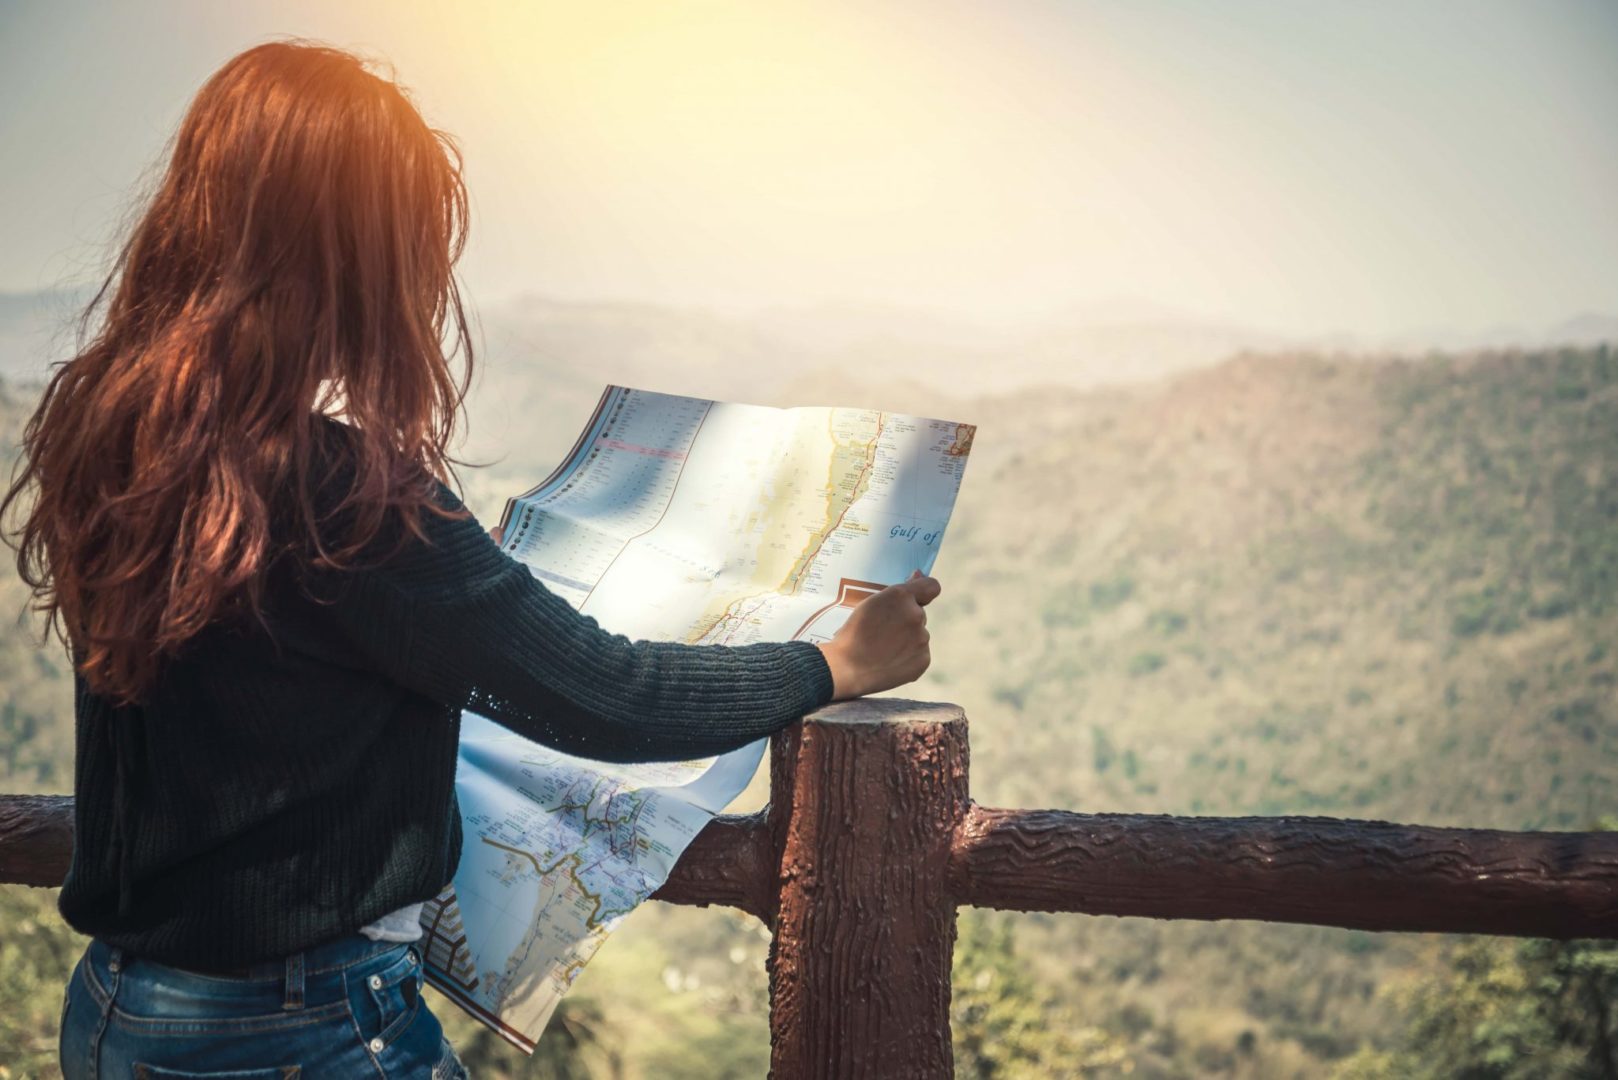 Choose your own adventure like the red haired woman reading a map.